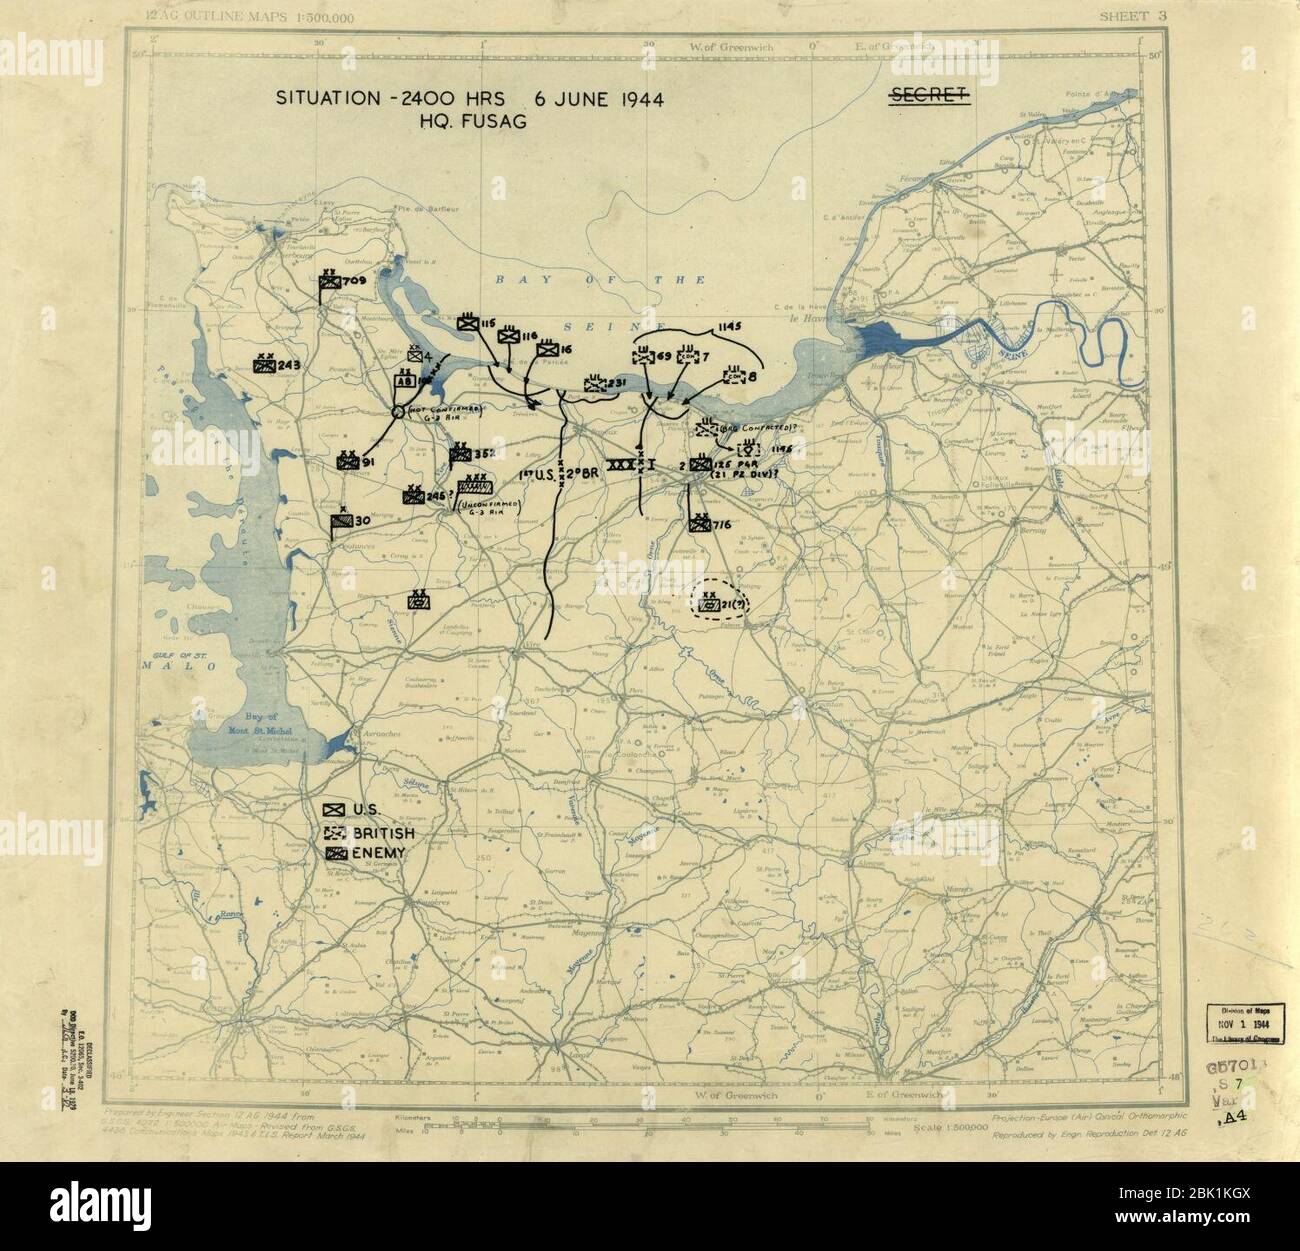 battle of the bulge maps